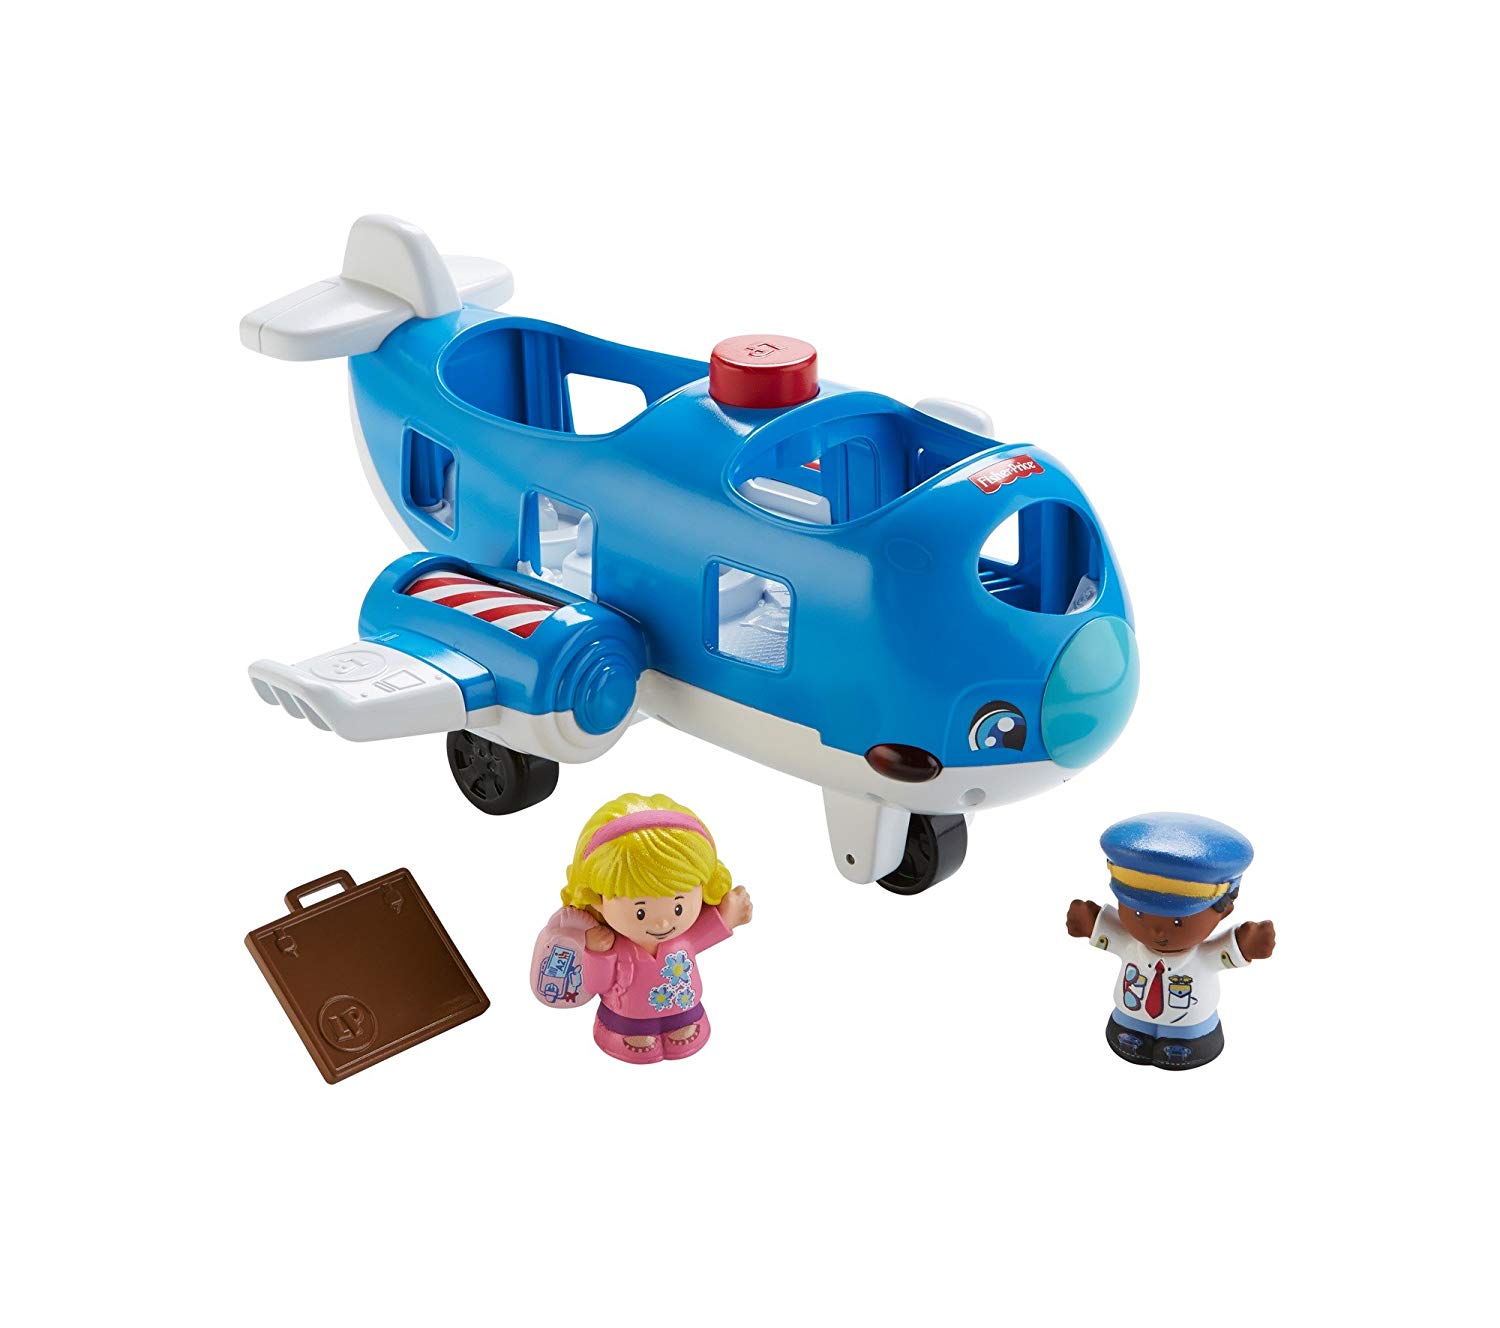 Mattel Little People Fisher Price Fkx05 Aircraft